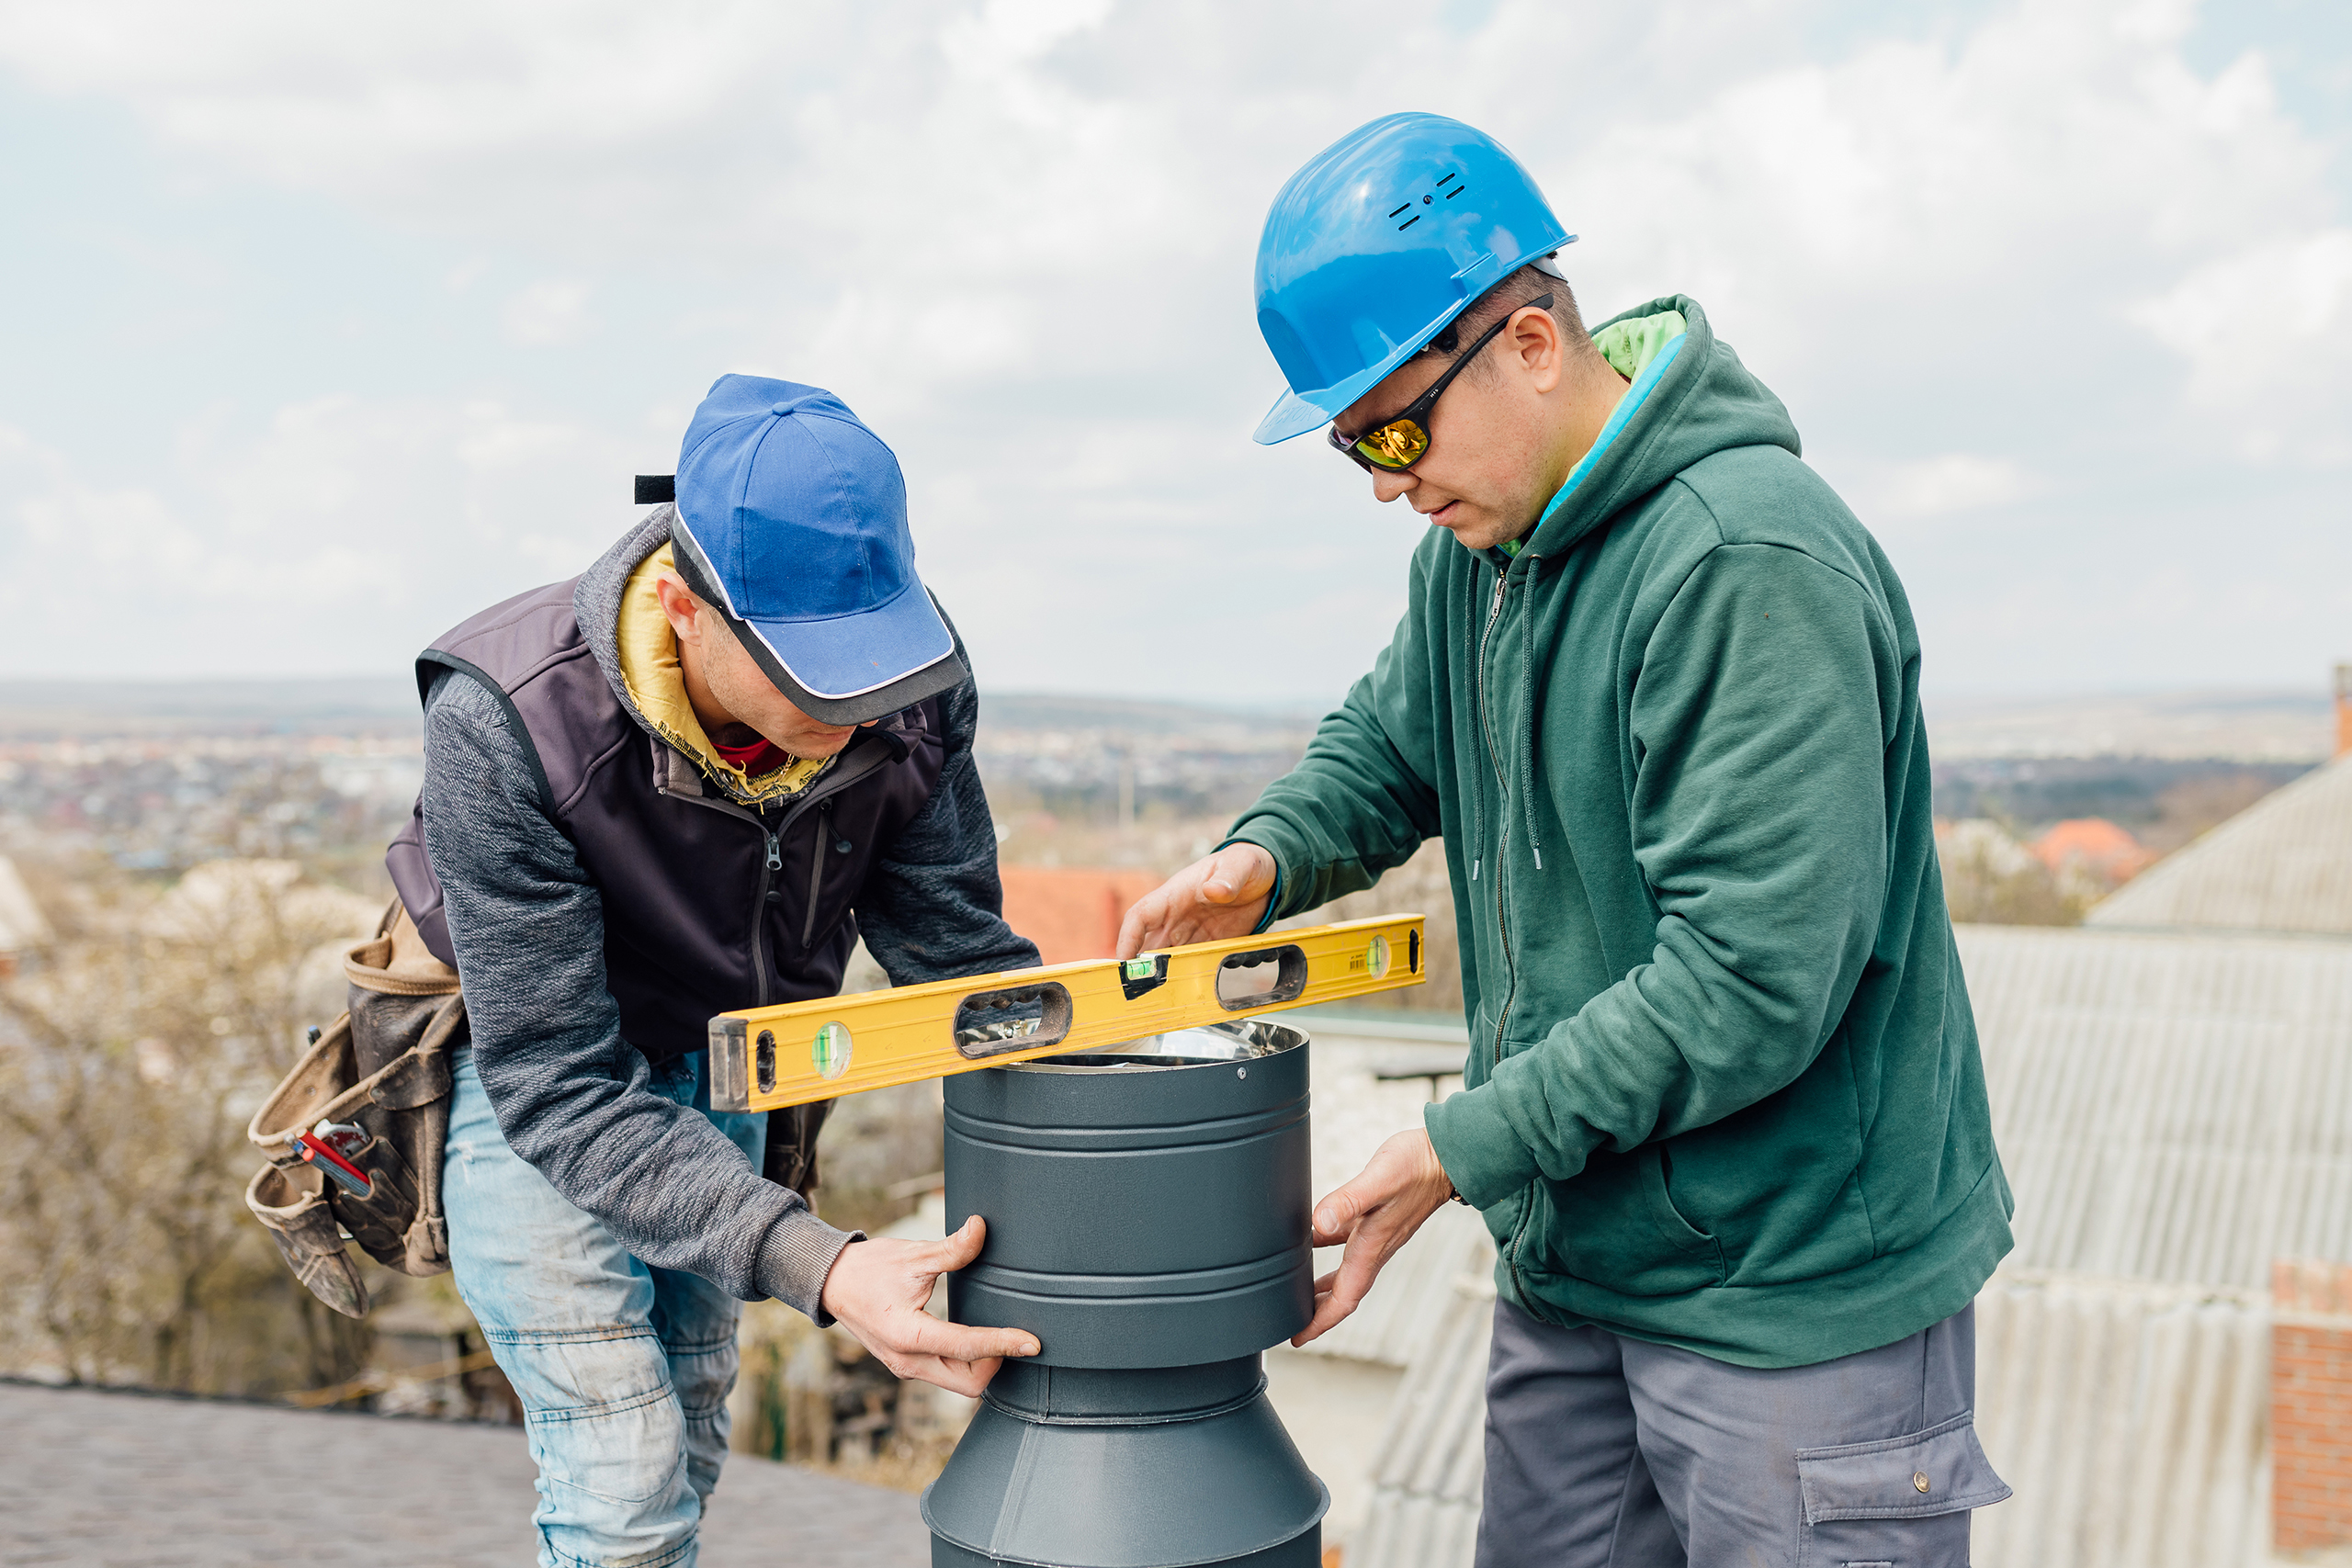 Chimney Cap Repair to Keep Your Family and Home Safe